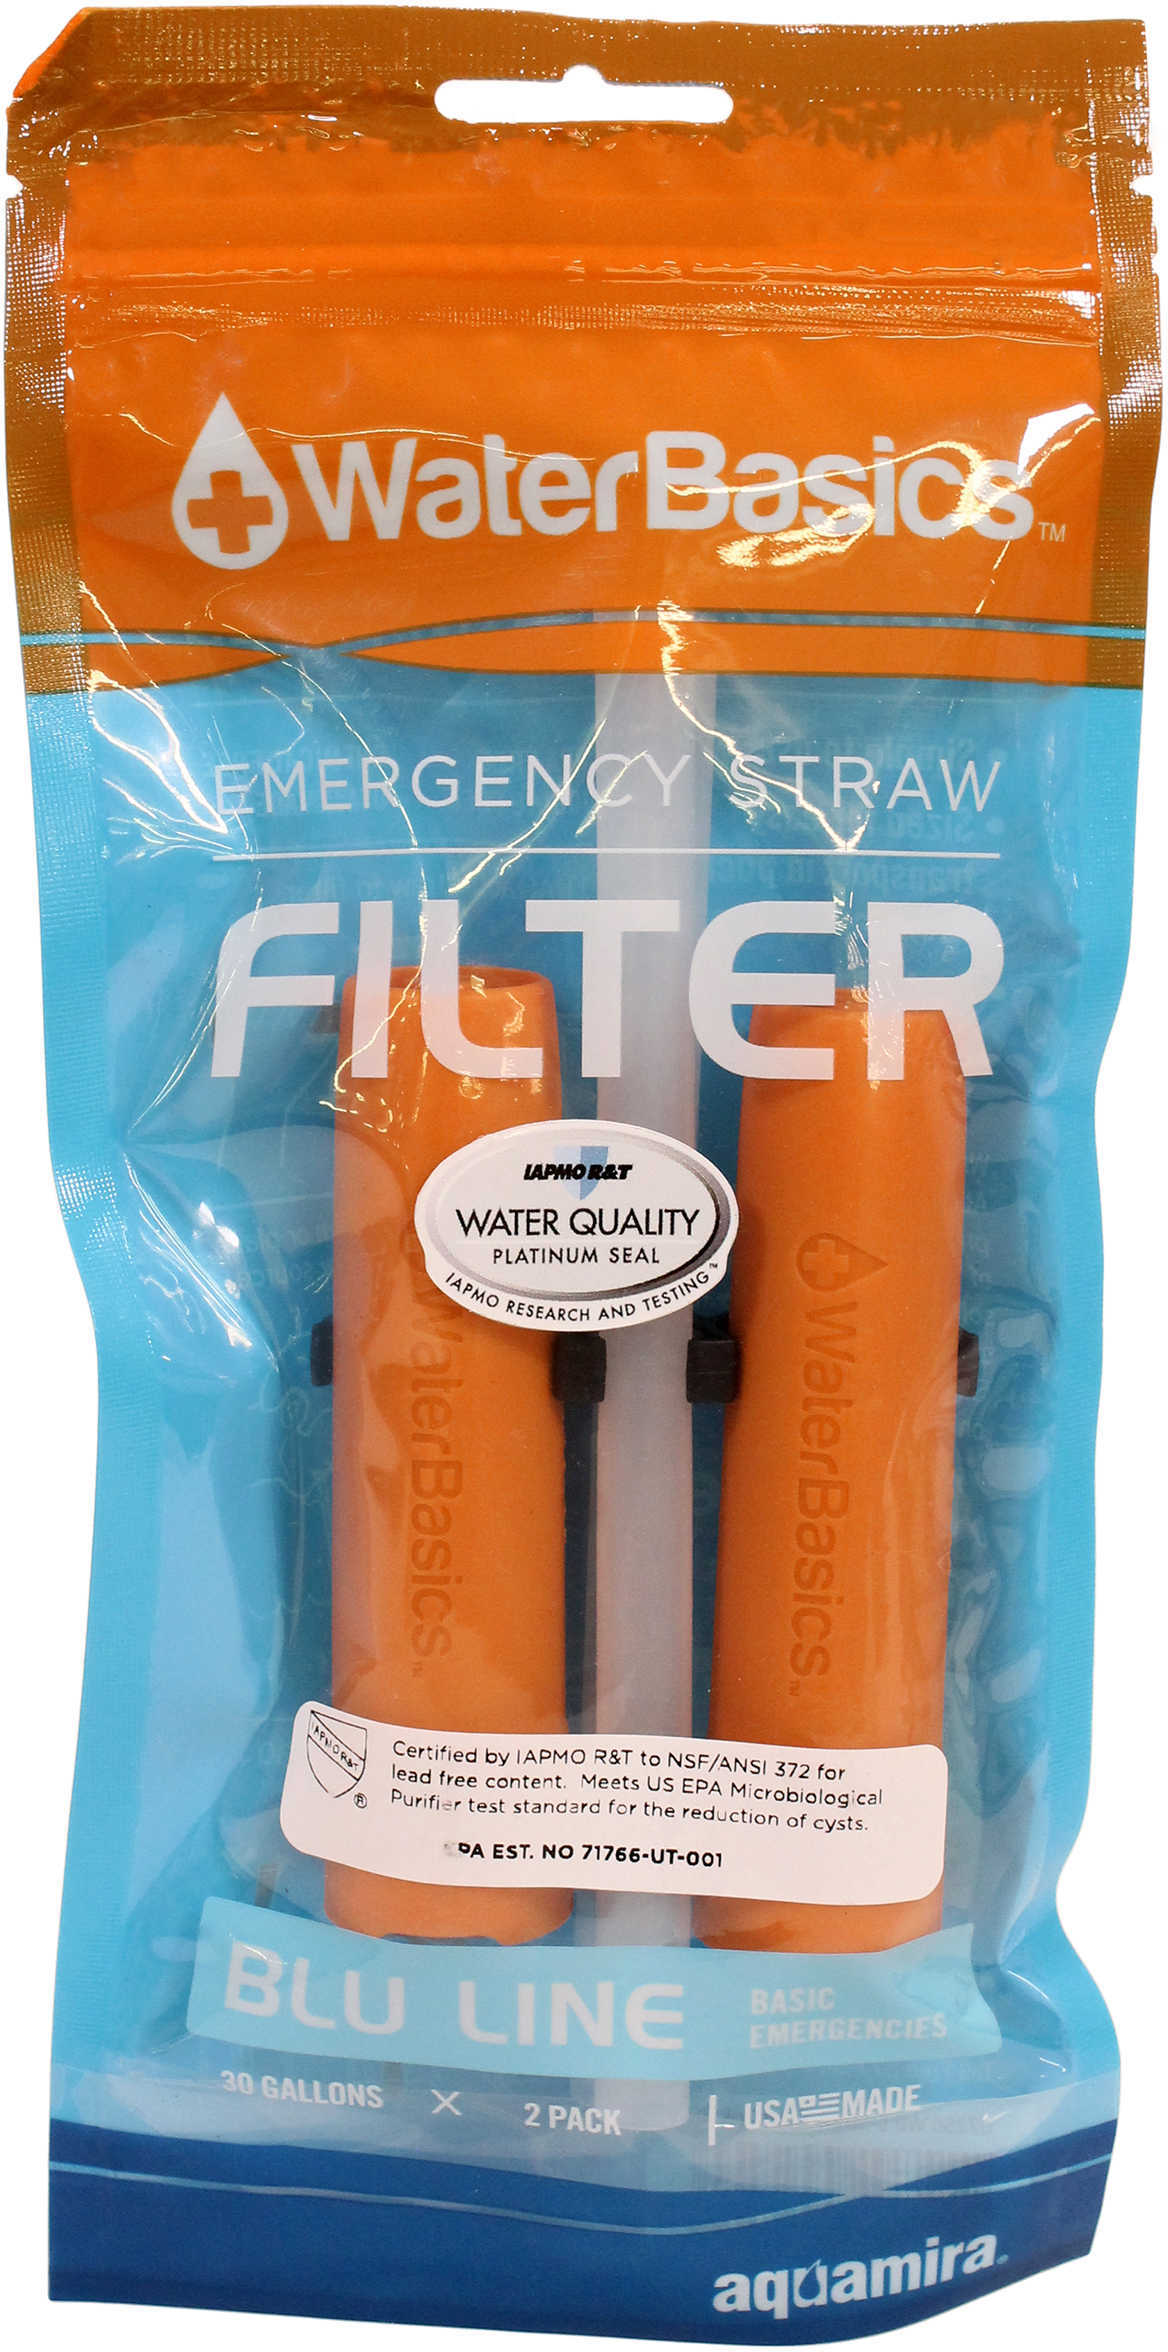 Aquamira WaterBasics Emergency Straw Filter Blue Line - Parasite Protection Filters up to 30 Gallons of per